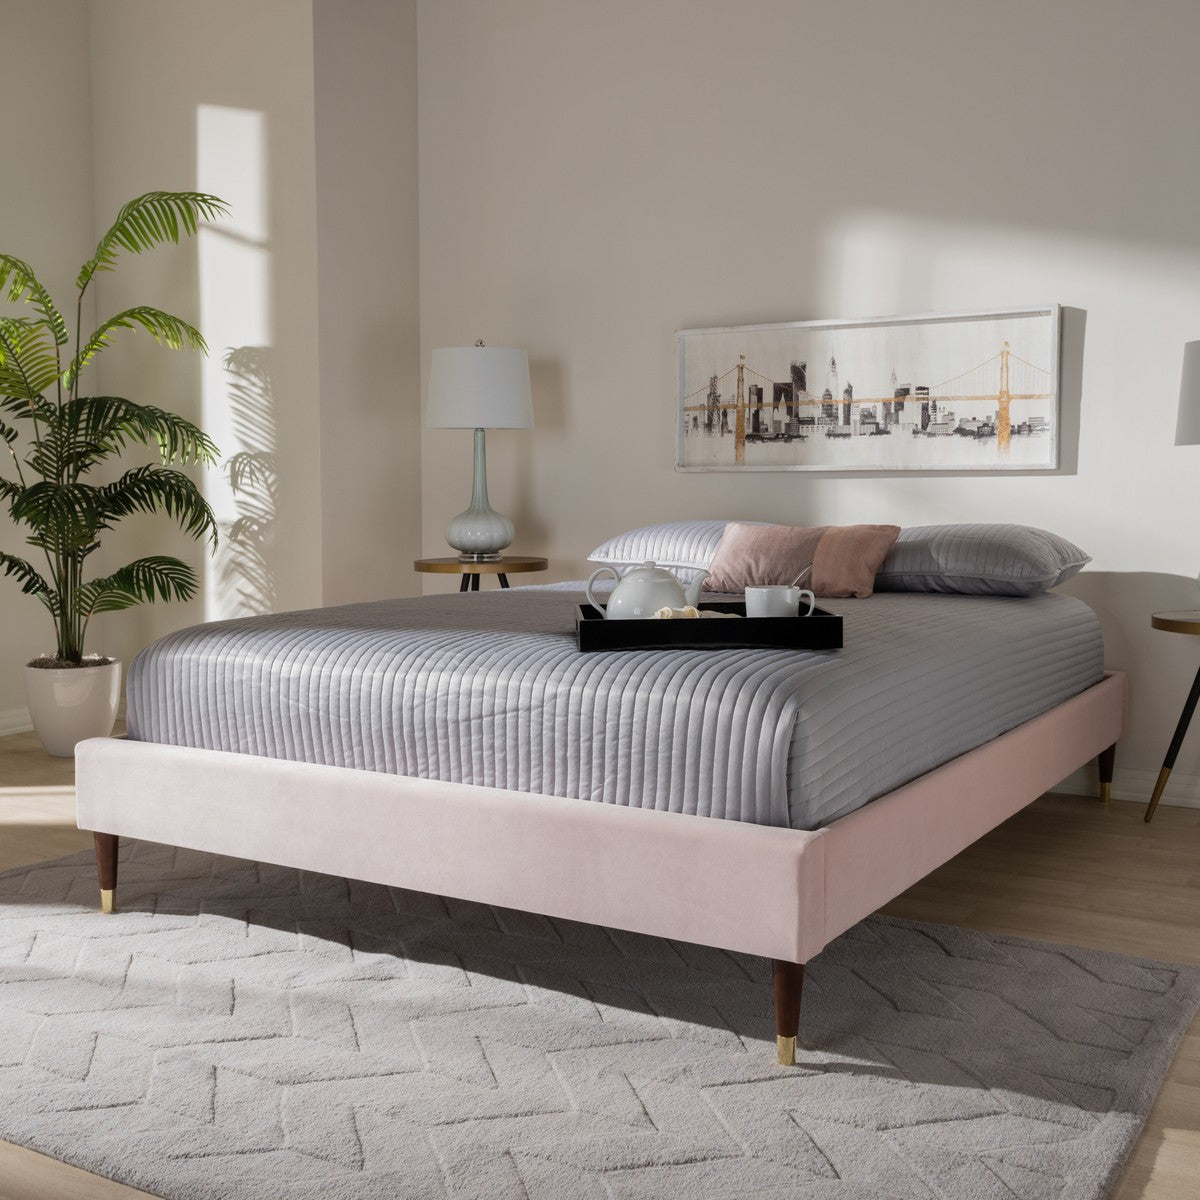 Baxton Studio Volden Glam and Luxe Light Pink Velvet Fabric Upholstered King Size Wood Platform Bed Frame with Gold-Tone Leg Tips